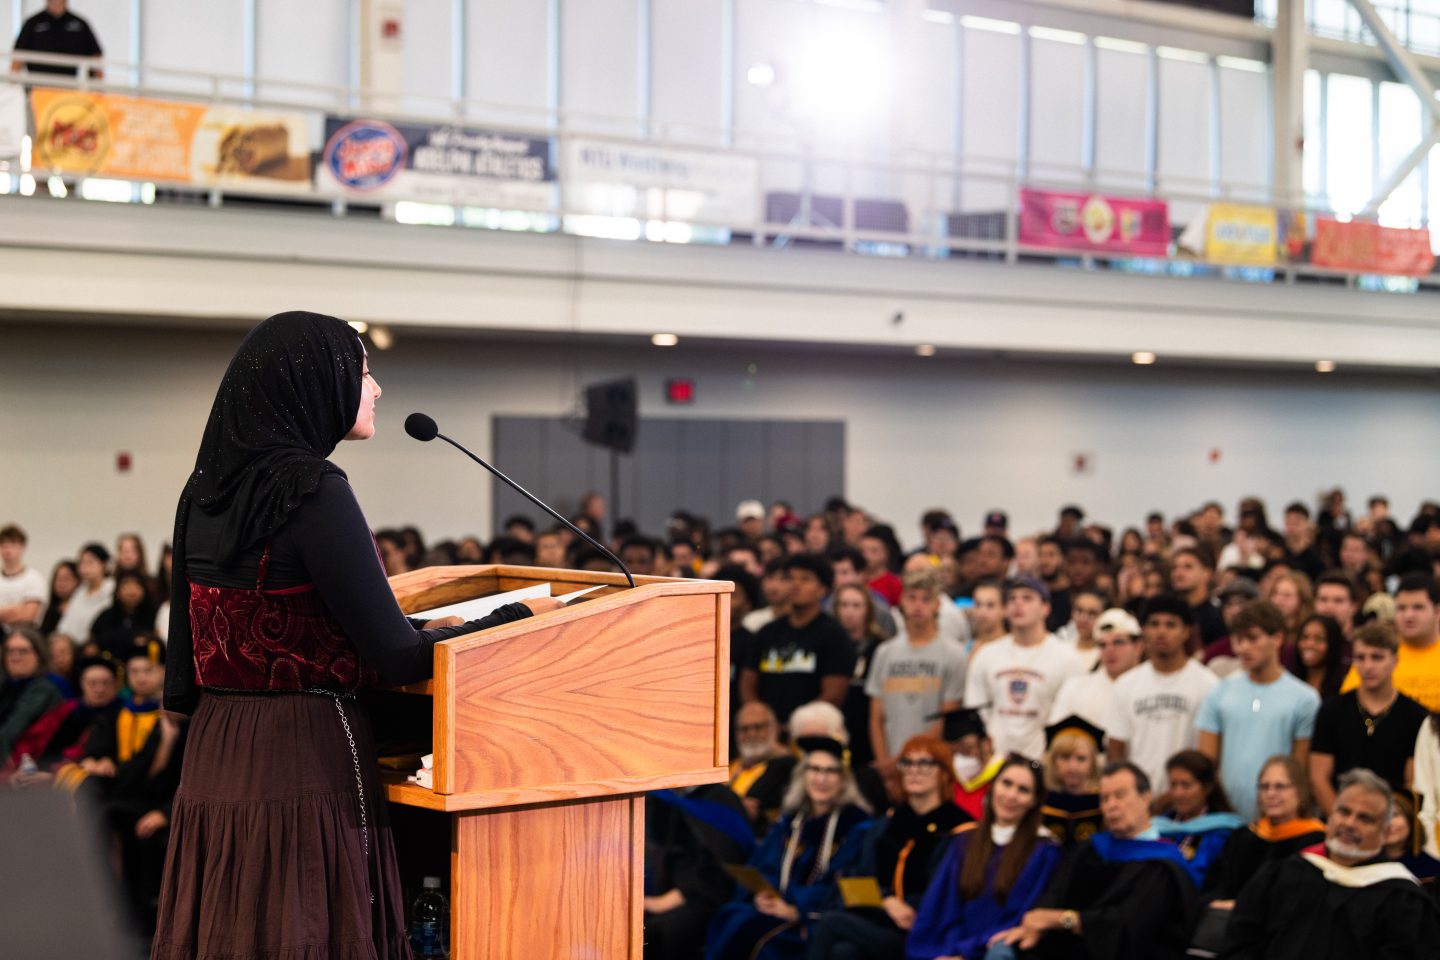 A woman in a sparkling black hijab speaking at a lectern in front of a blurred audience in a large auditorium, with individuals in a mix of casual clothing and academic gowns.